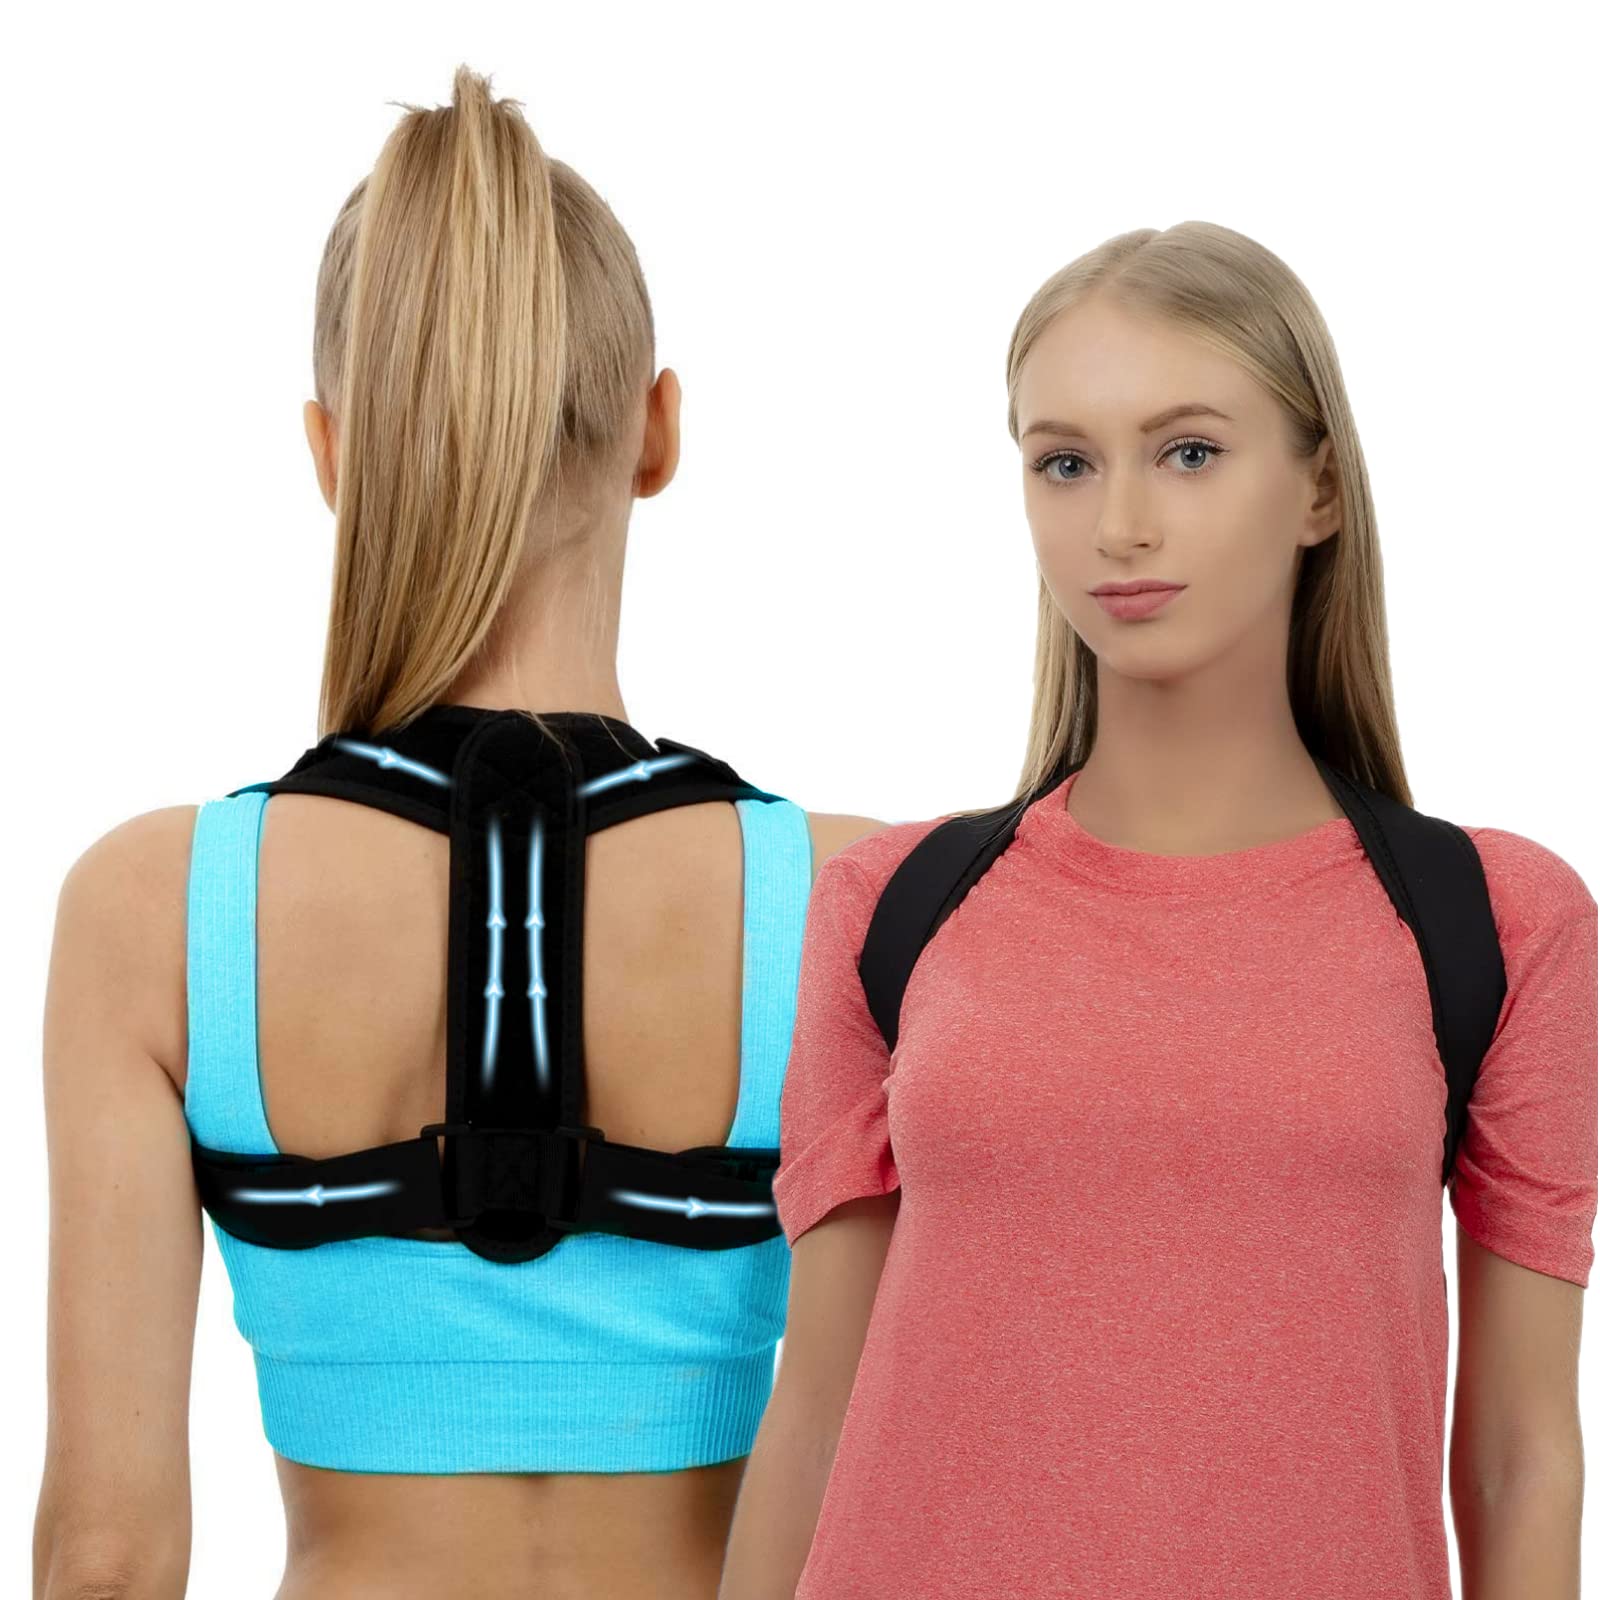 WTEN Posture Corrector for Women and Men, Huninpr Adjustable Upper Back Brace, Breathable Back Support straightener, Providing Pain Relief from Lumbar, Neck, Shoulder, and Clavicle, Back.